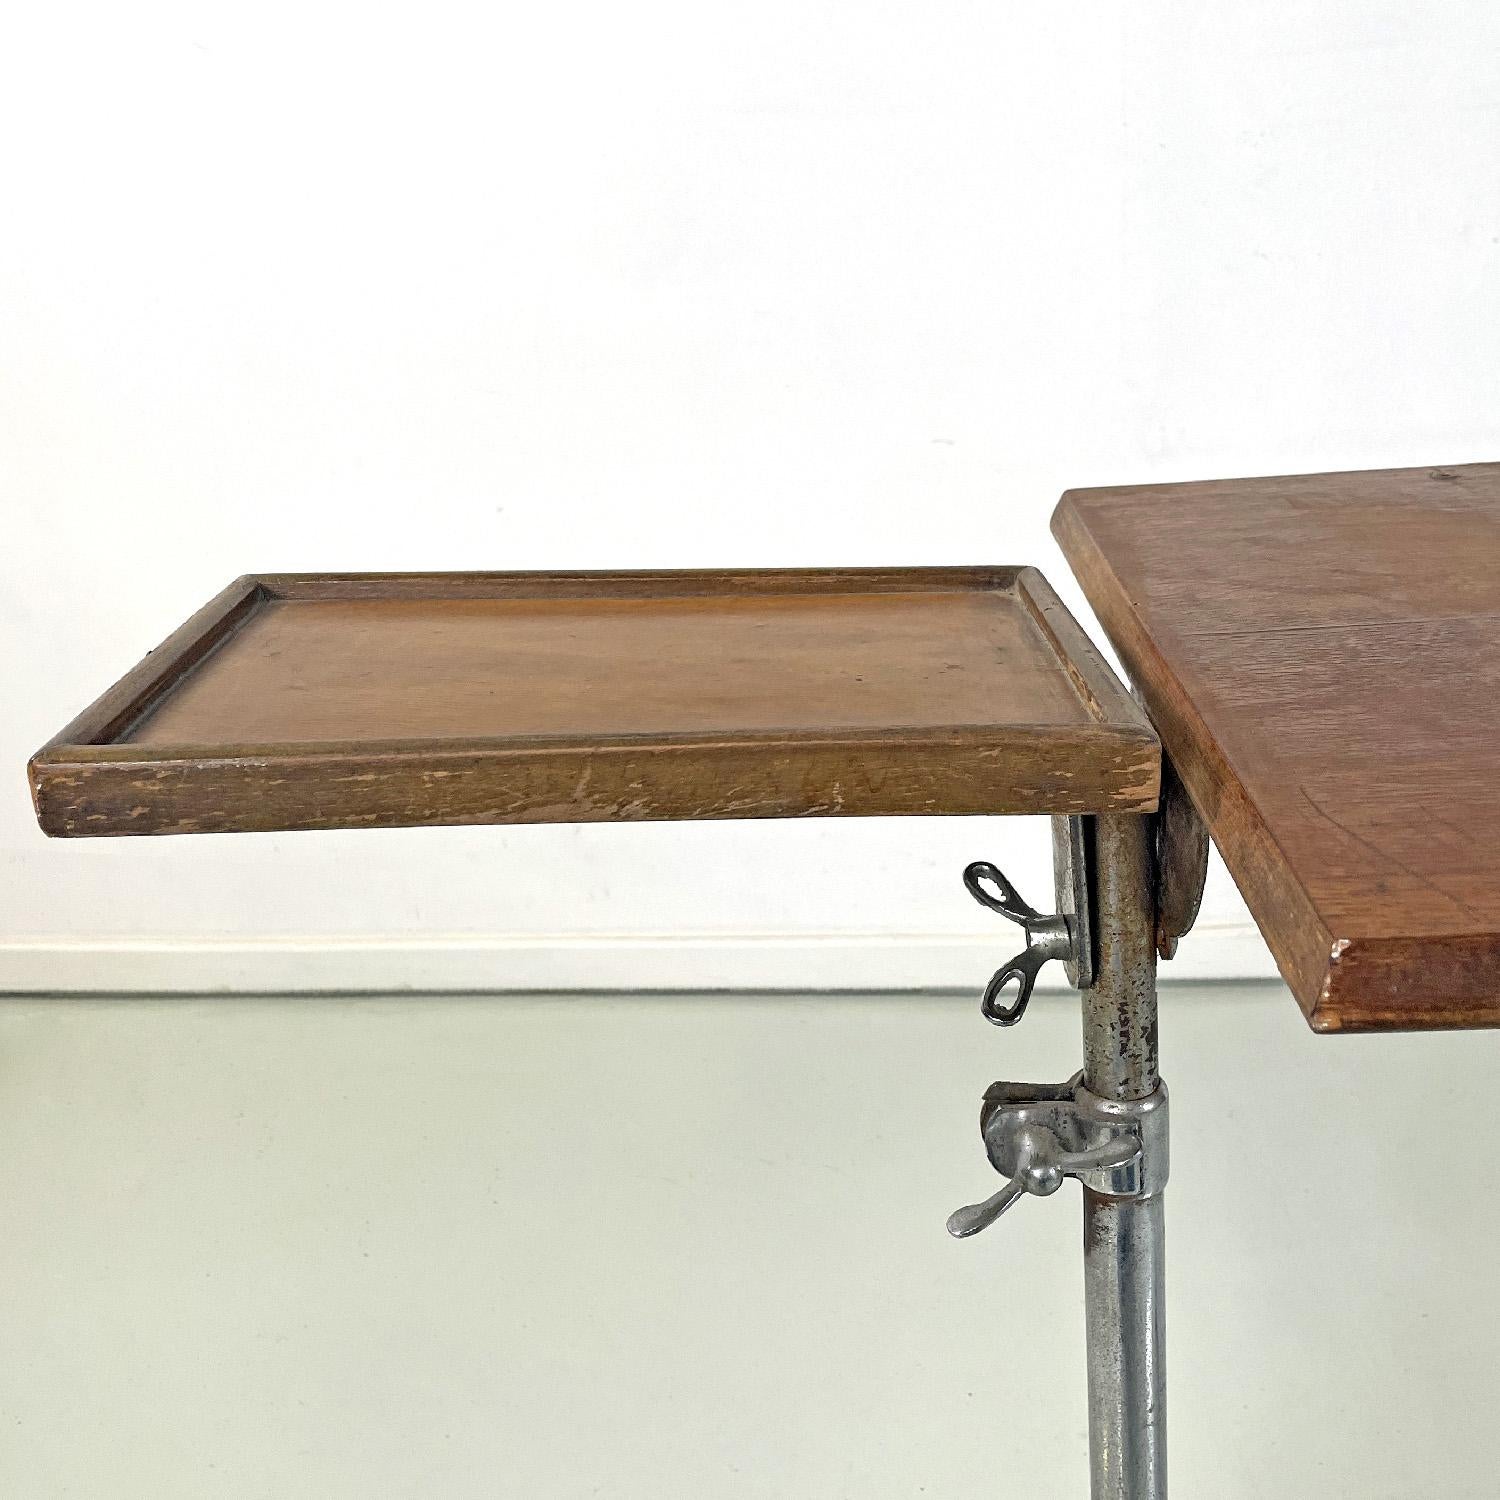 Italian mid-century modern wood and metal industrial work table, 1960s For Sale 5